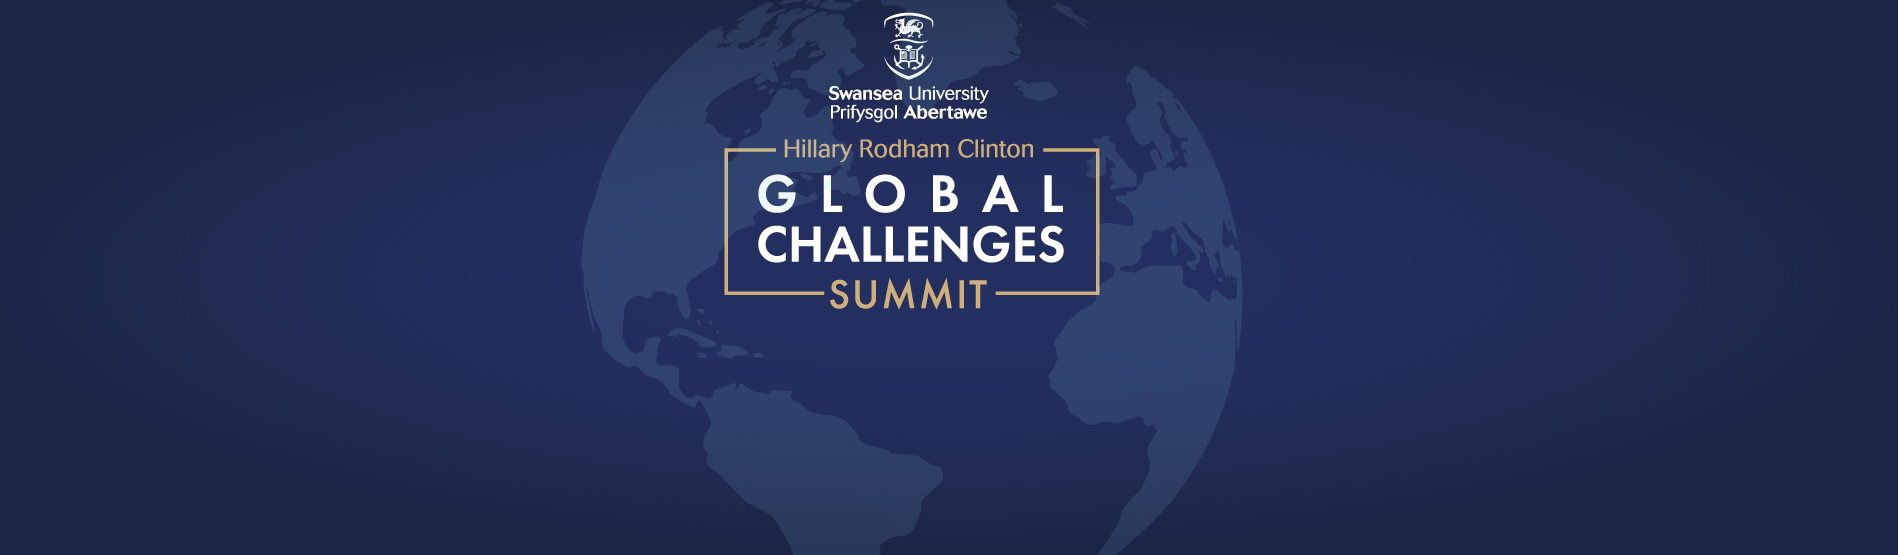 The Global Challenges Summit Branding